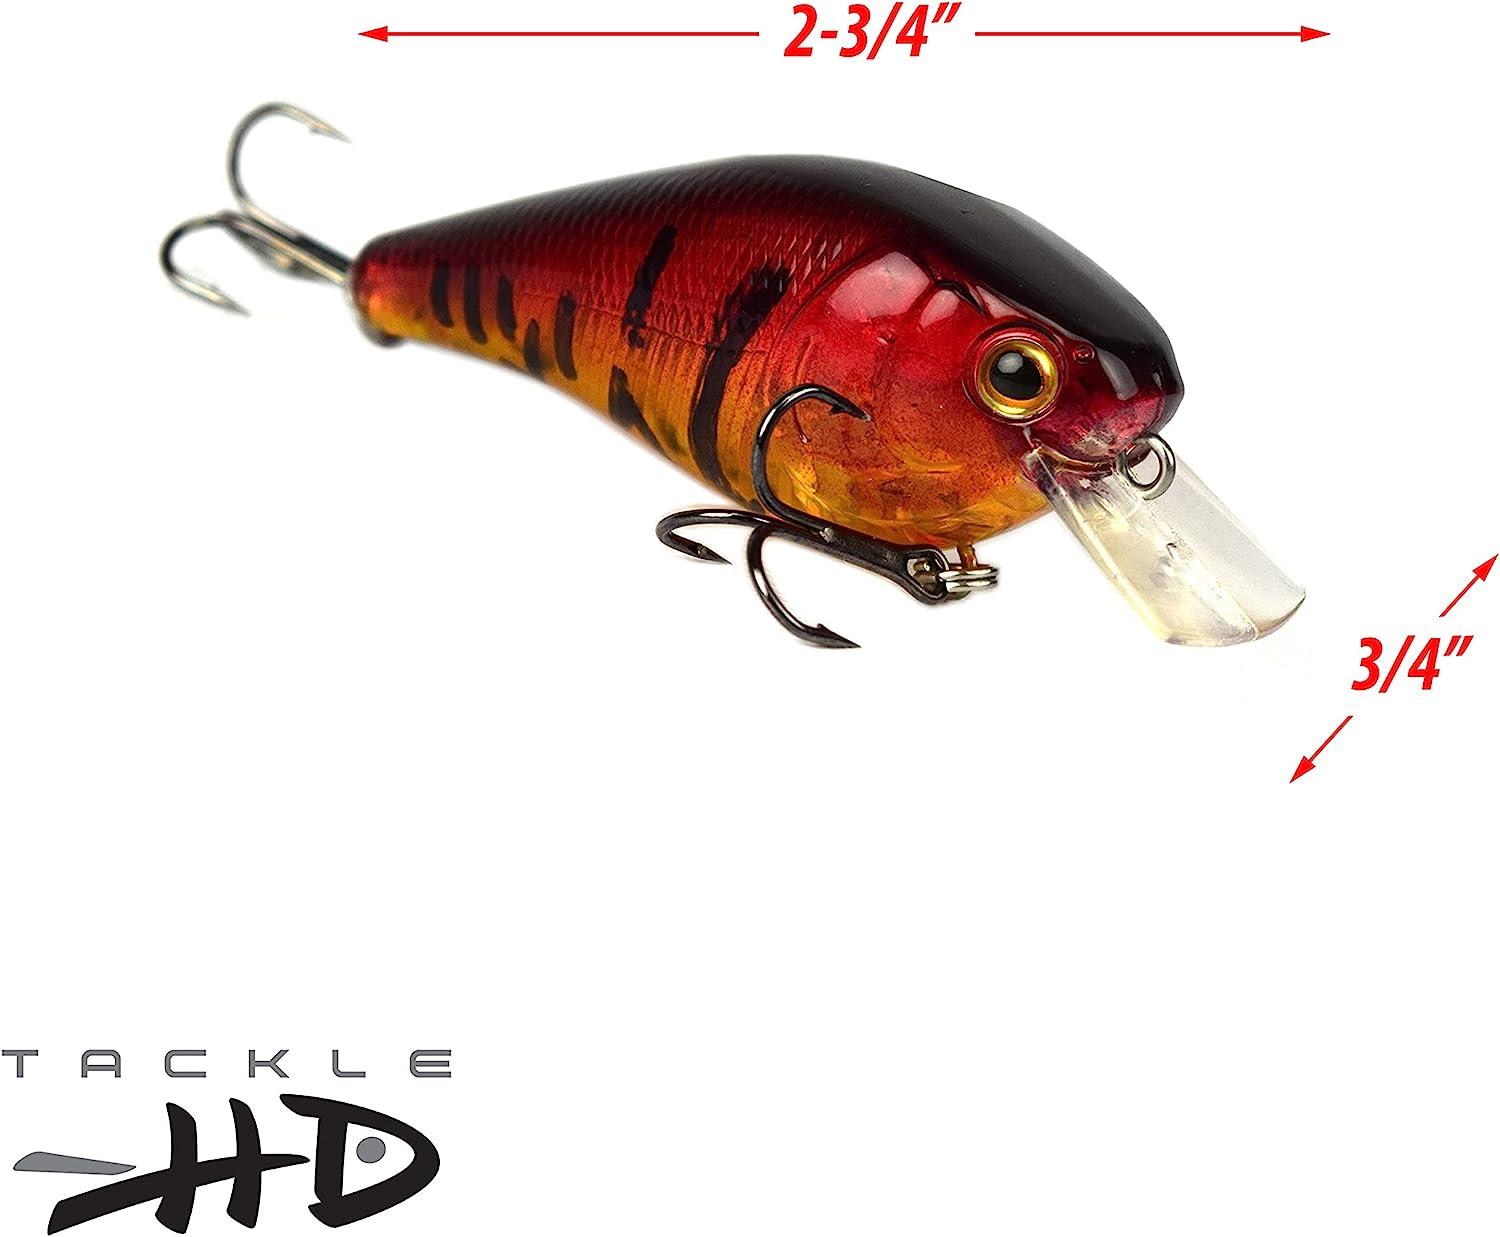 Tackle HD 2-Pack Square Bill Crankbait, 2.75 Lipped Rattle Crankbaits with  Fishing Hooks, Top Water Fishing Lures for Crappie, Walleye, Perch, or Bass  Fishing Red Craw